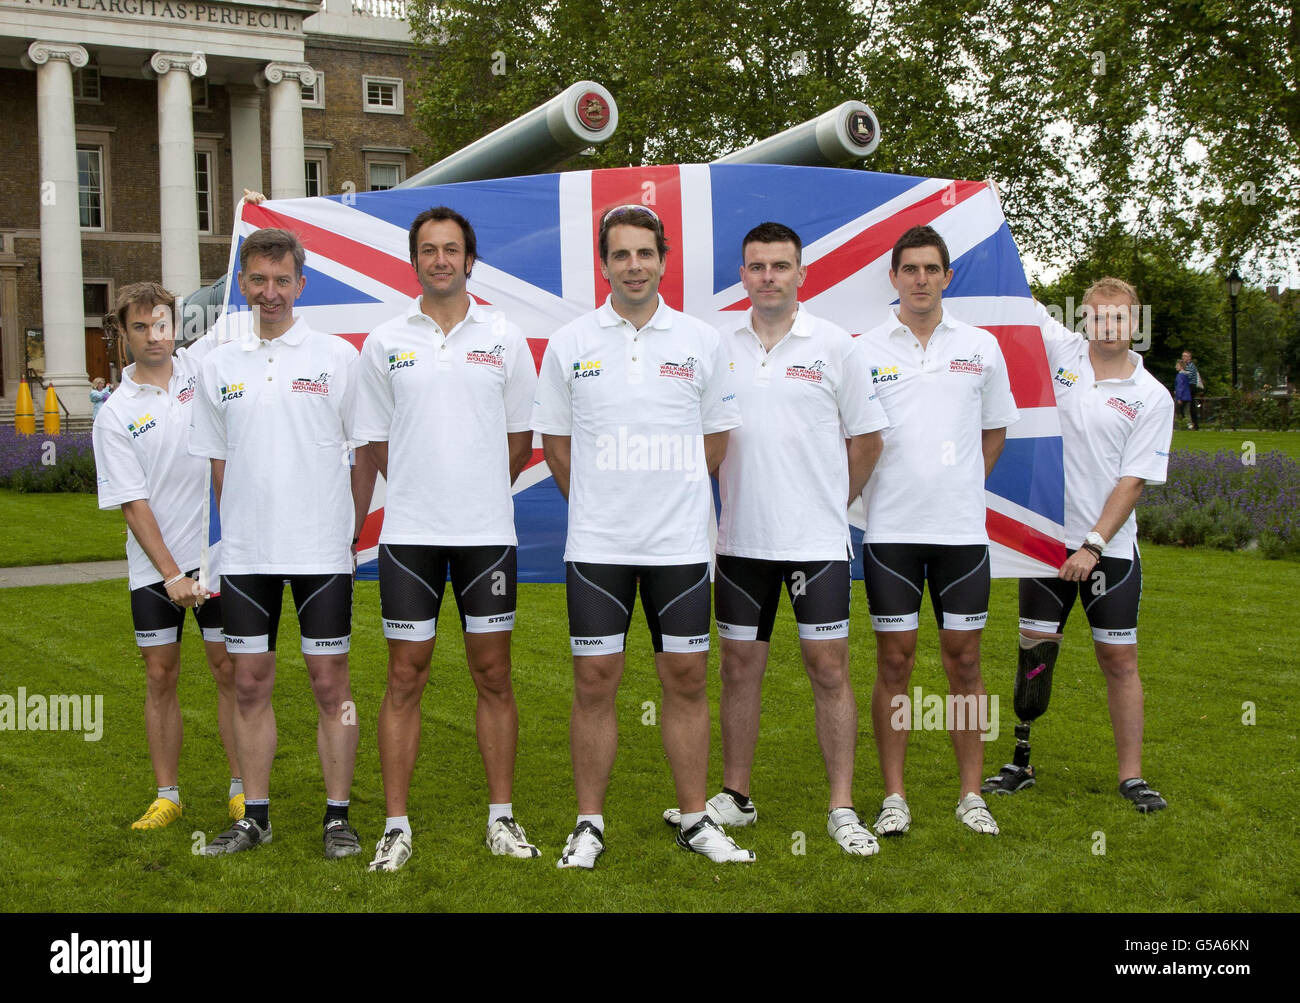 Television adventurer Mark Beaumont (centre) reveals the cycle team - (from left to right) wounded soldier Rupert 'Rab' Smedley, Simon Oldfield, wounded soldier Mike Westwell, wounded soldier Don Maclean, Peter Latham and wounded soldier Craig Preece - who he will be leading during the Trois Etapes cycle race in France to raise funds for Walking With The Wounded, at the Imperial War Museum in London. Stock Photo